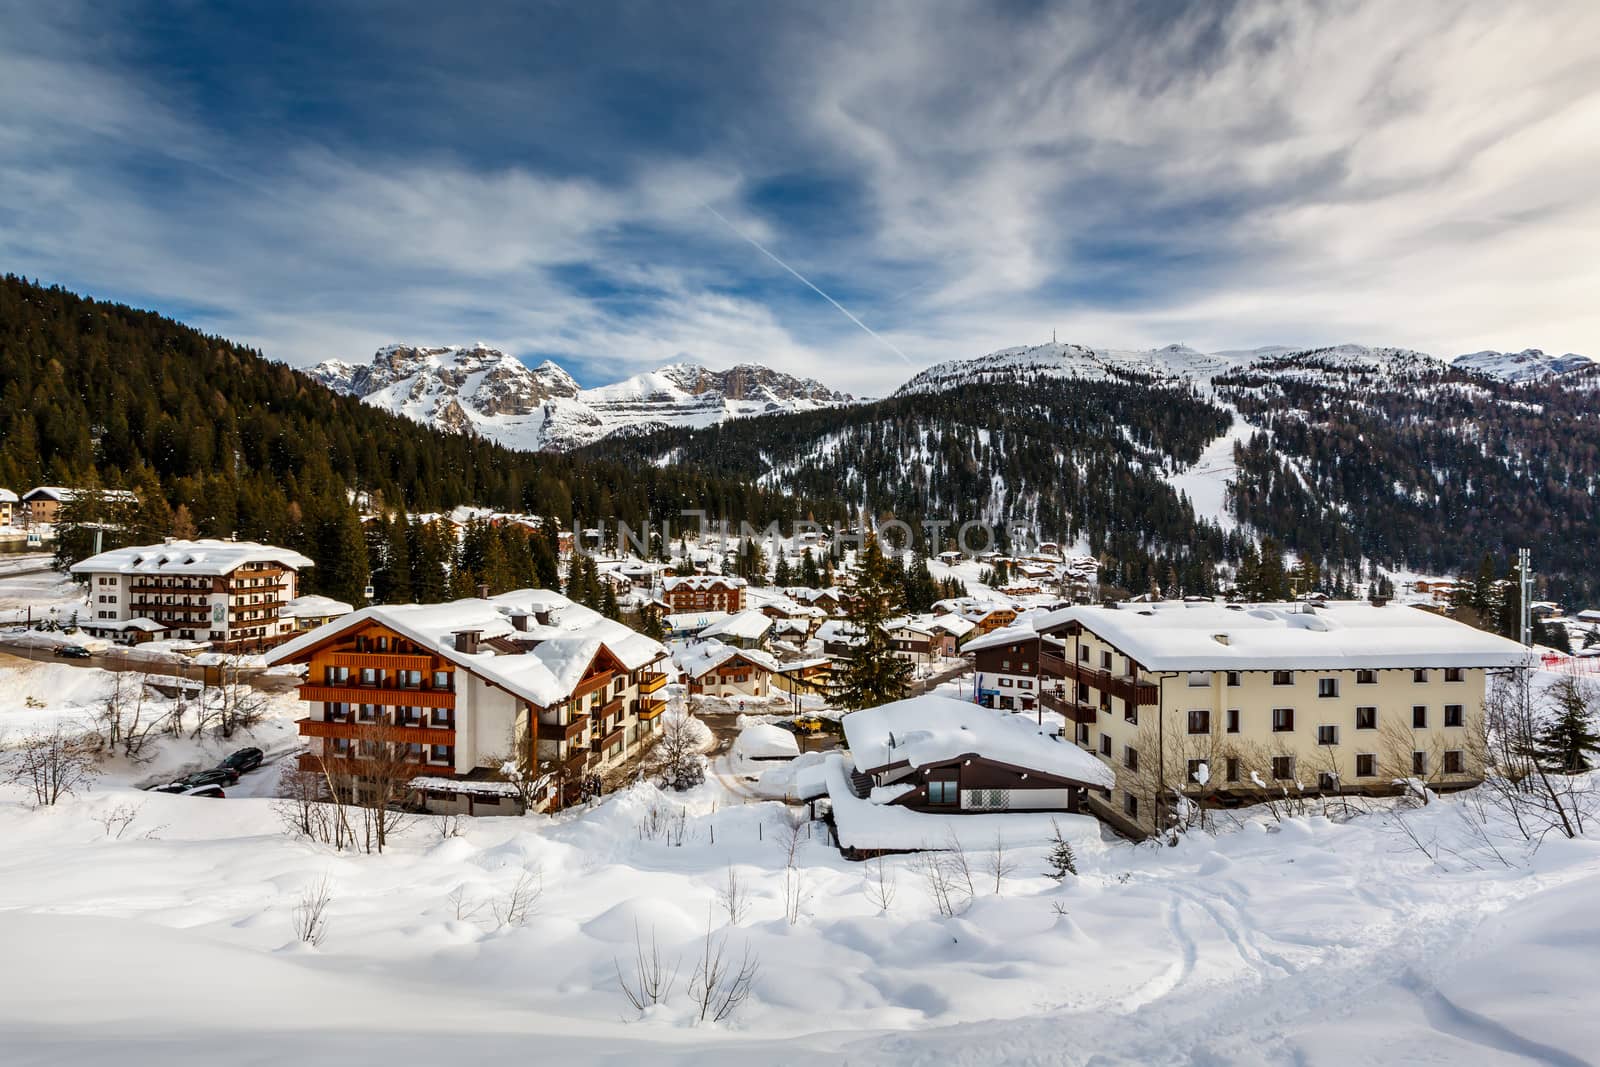 Ski Resort of Madonna di Campiglio, View from the Slope, Italian by anshar